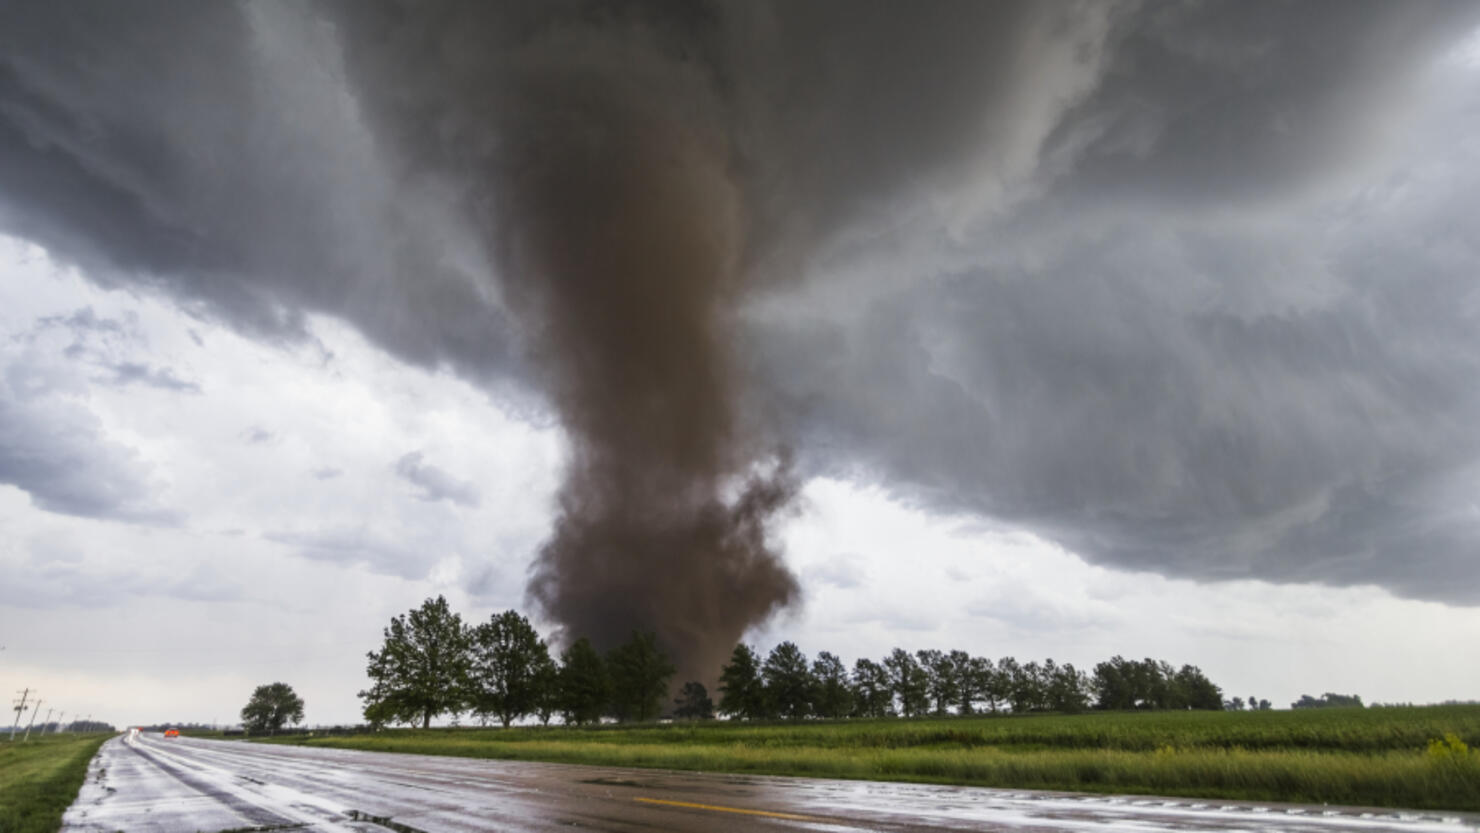 Two Tornadoes Confirmed In Louisiana As Rain Drenches State iHeart